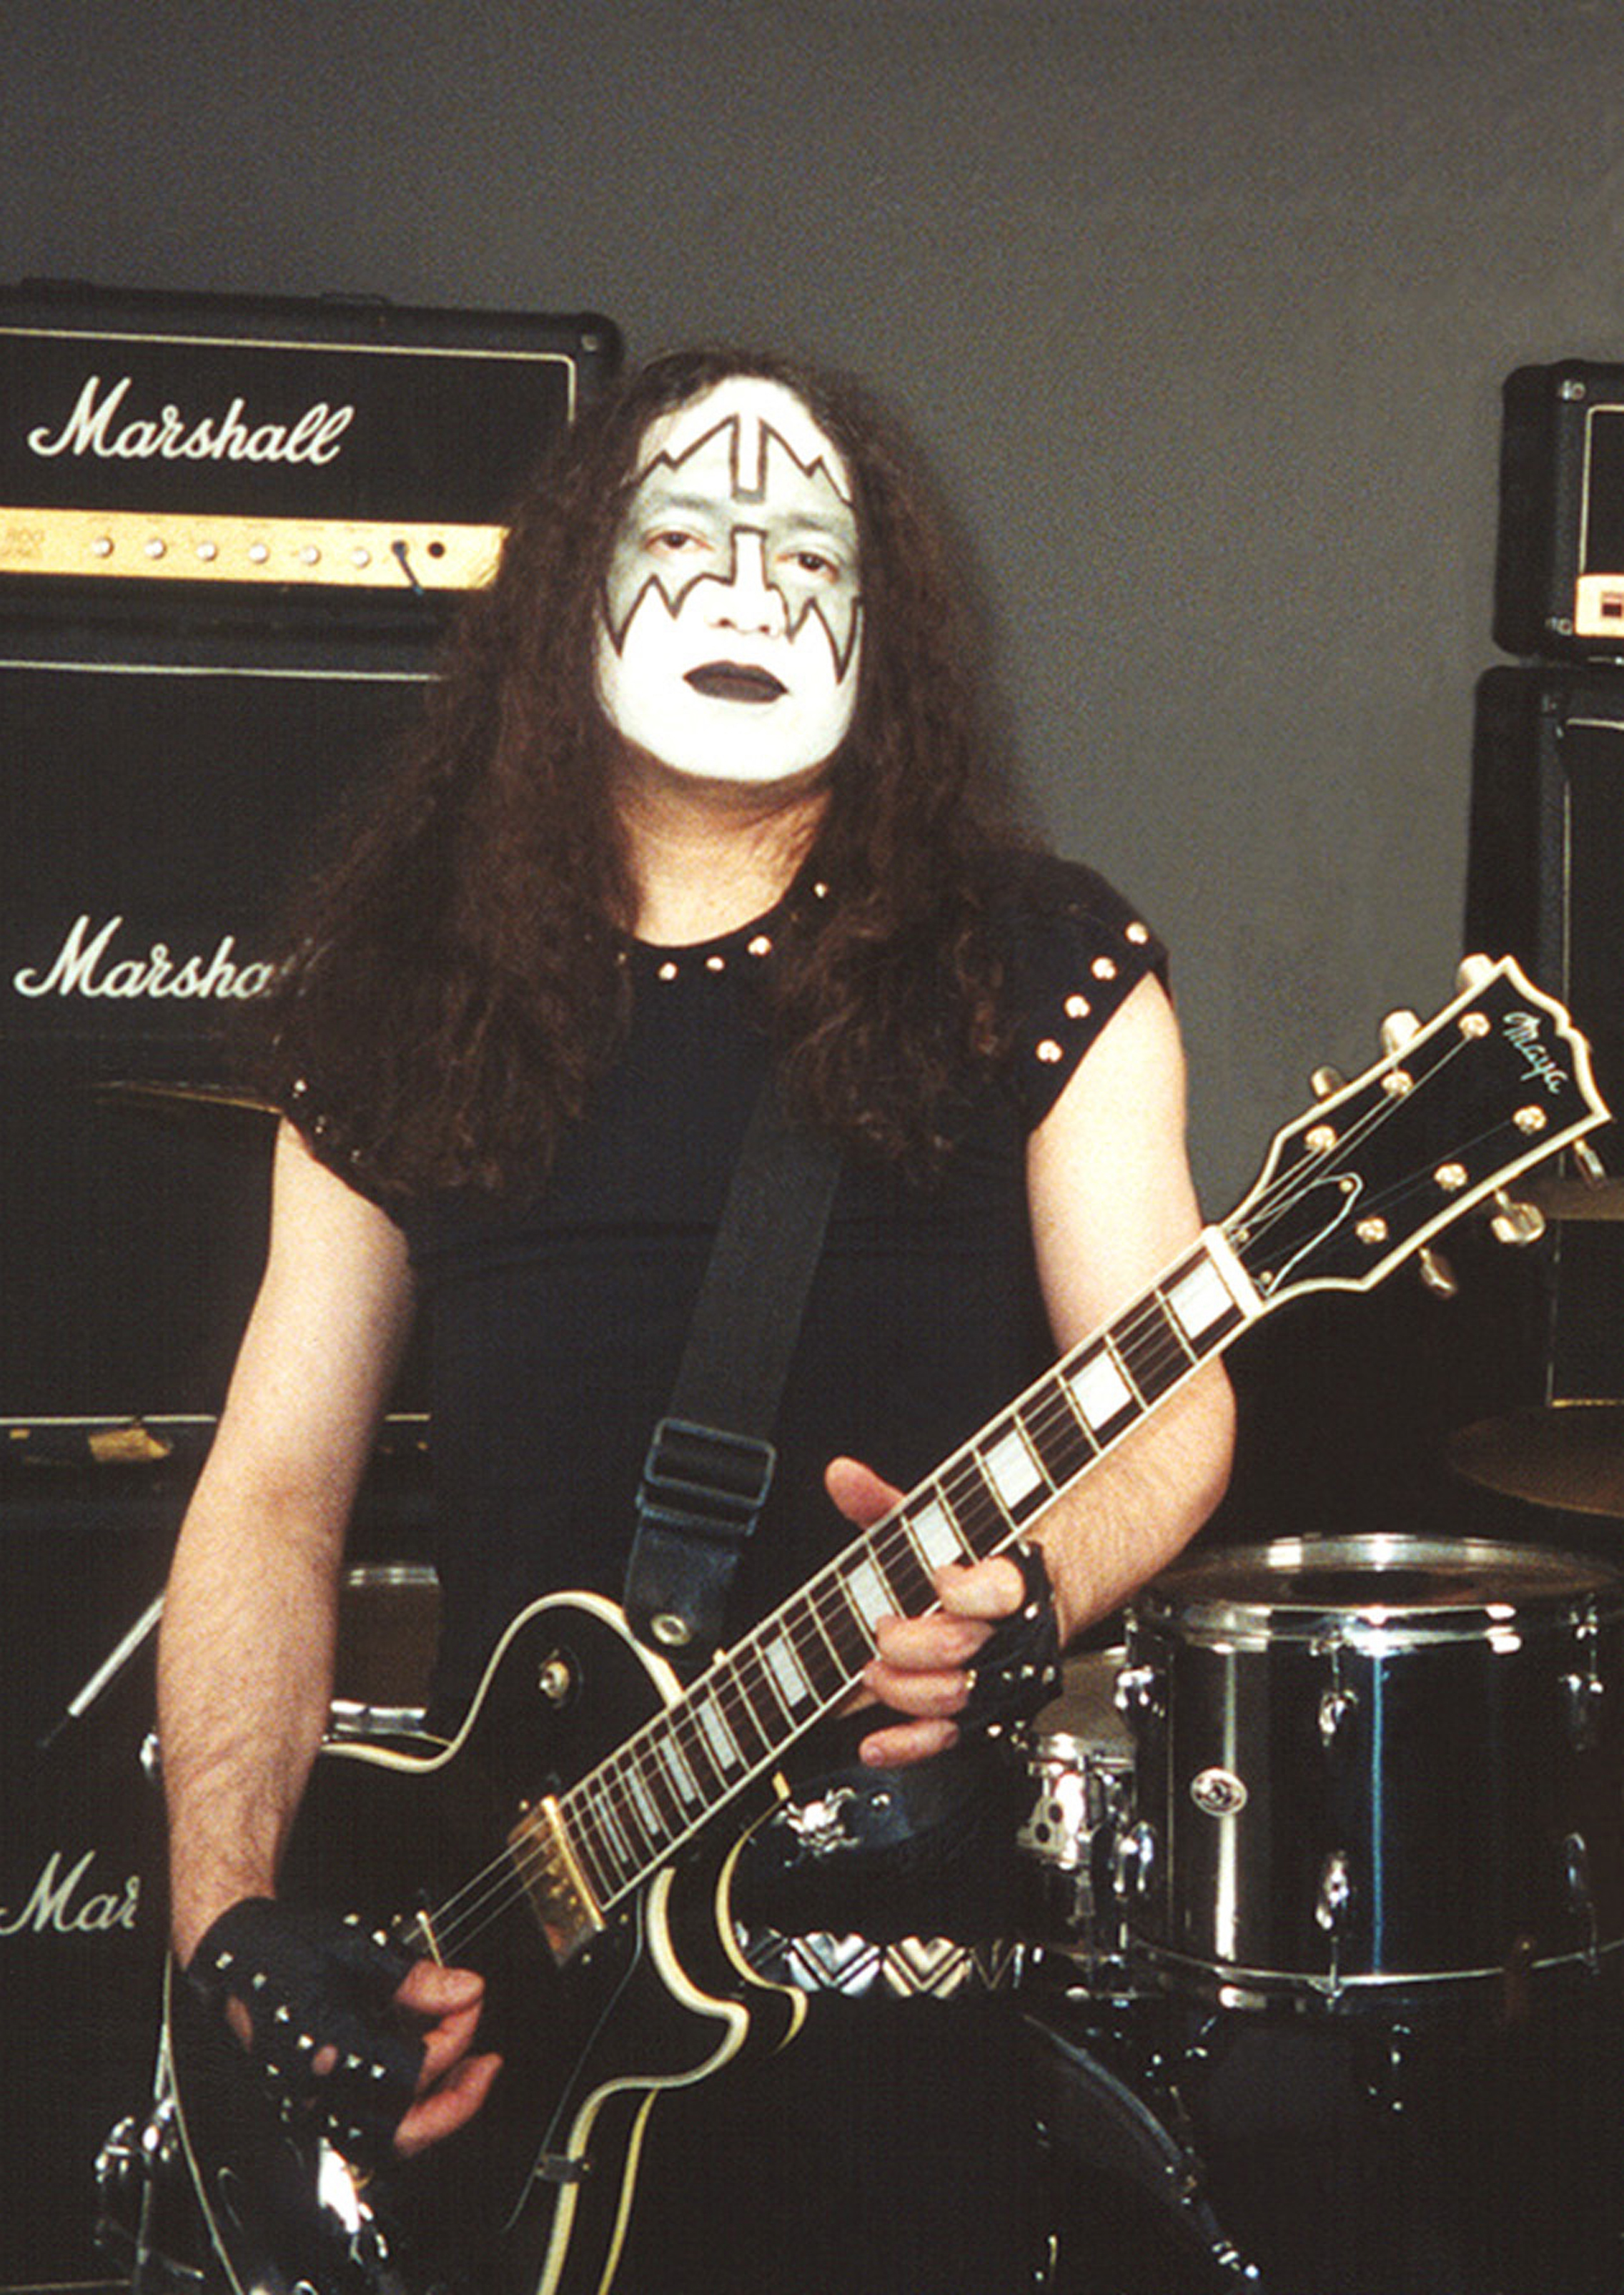 As Ace Frehley on Saturday Night Live.